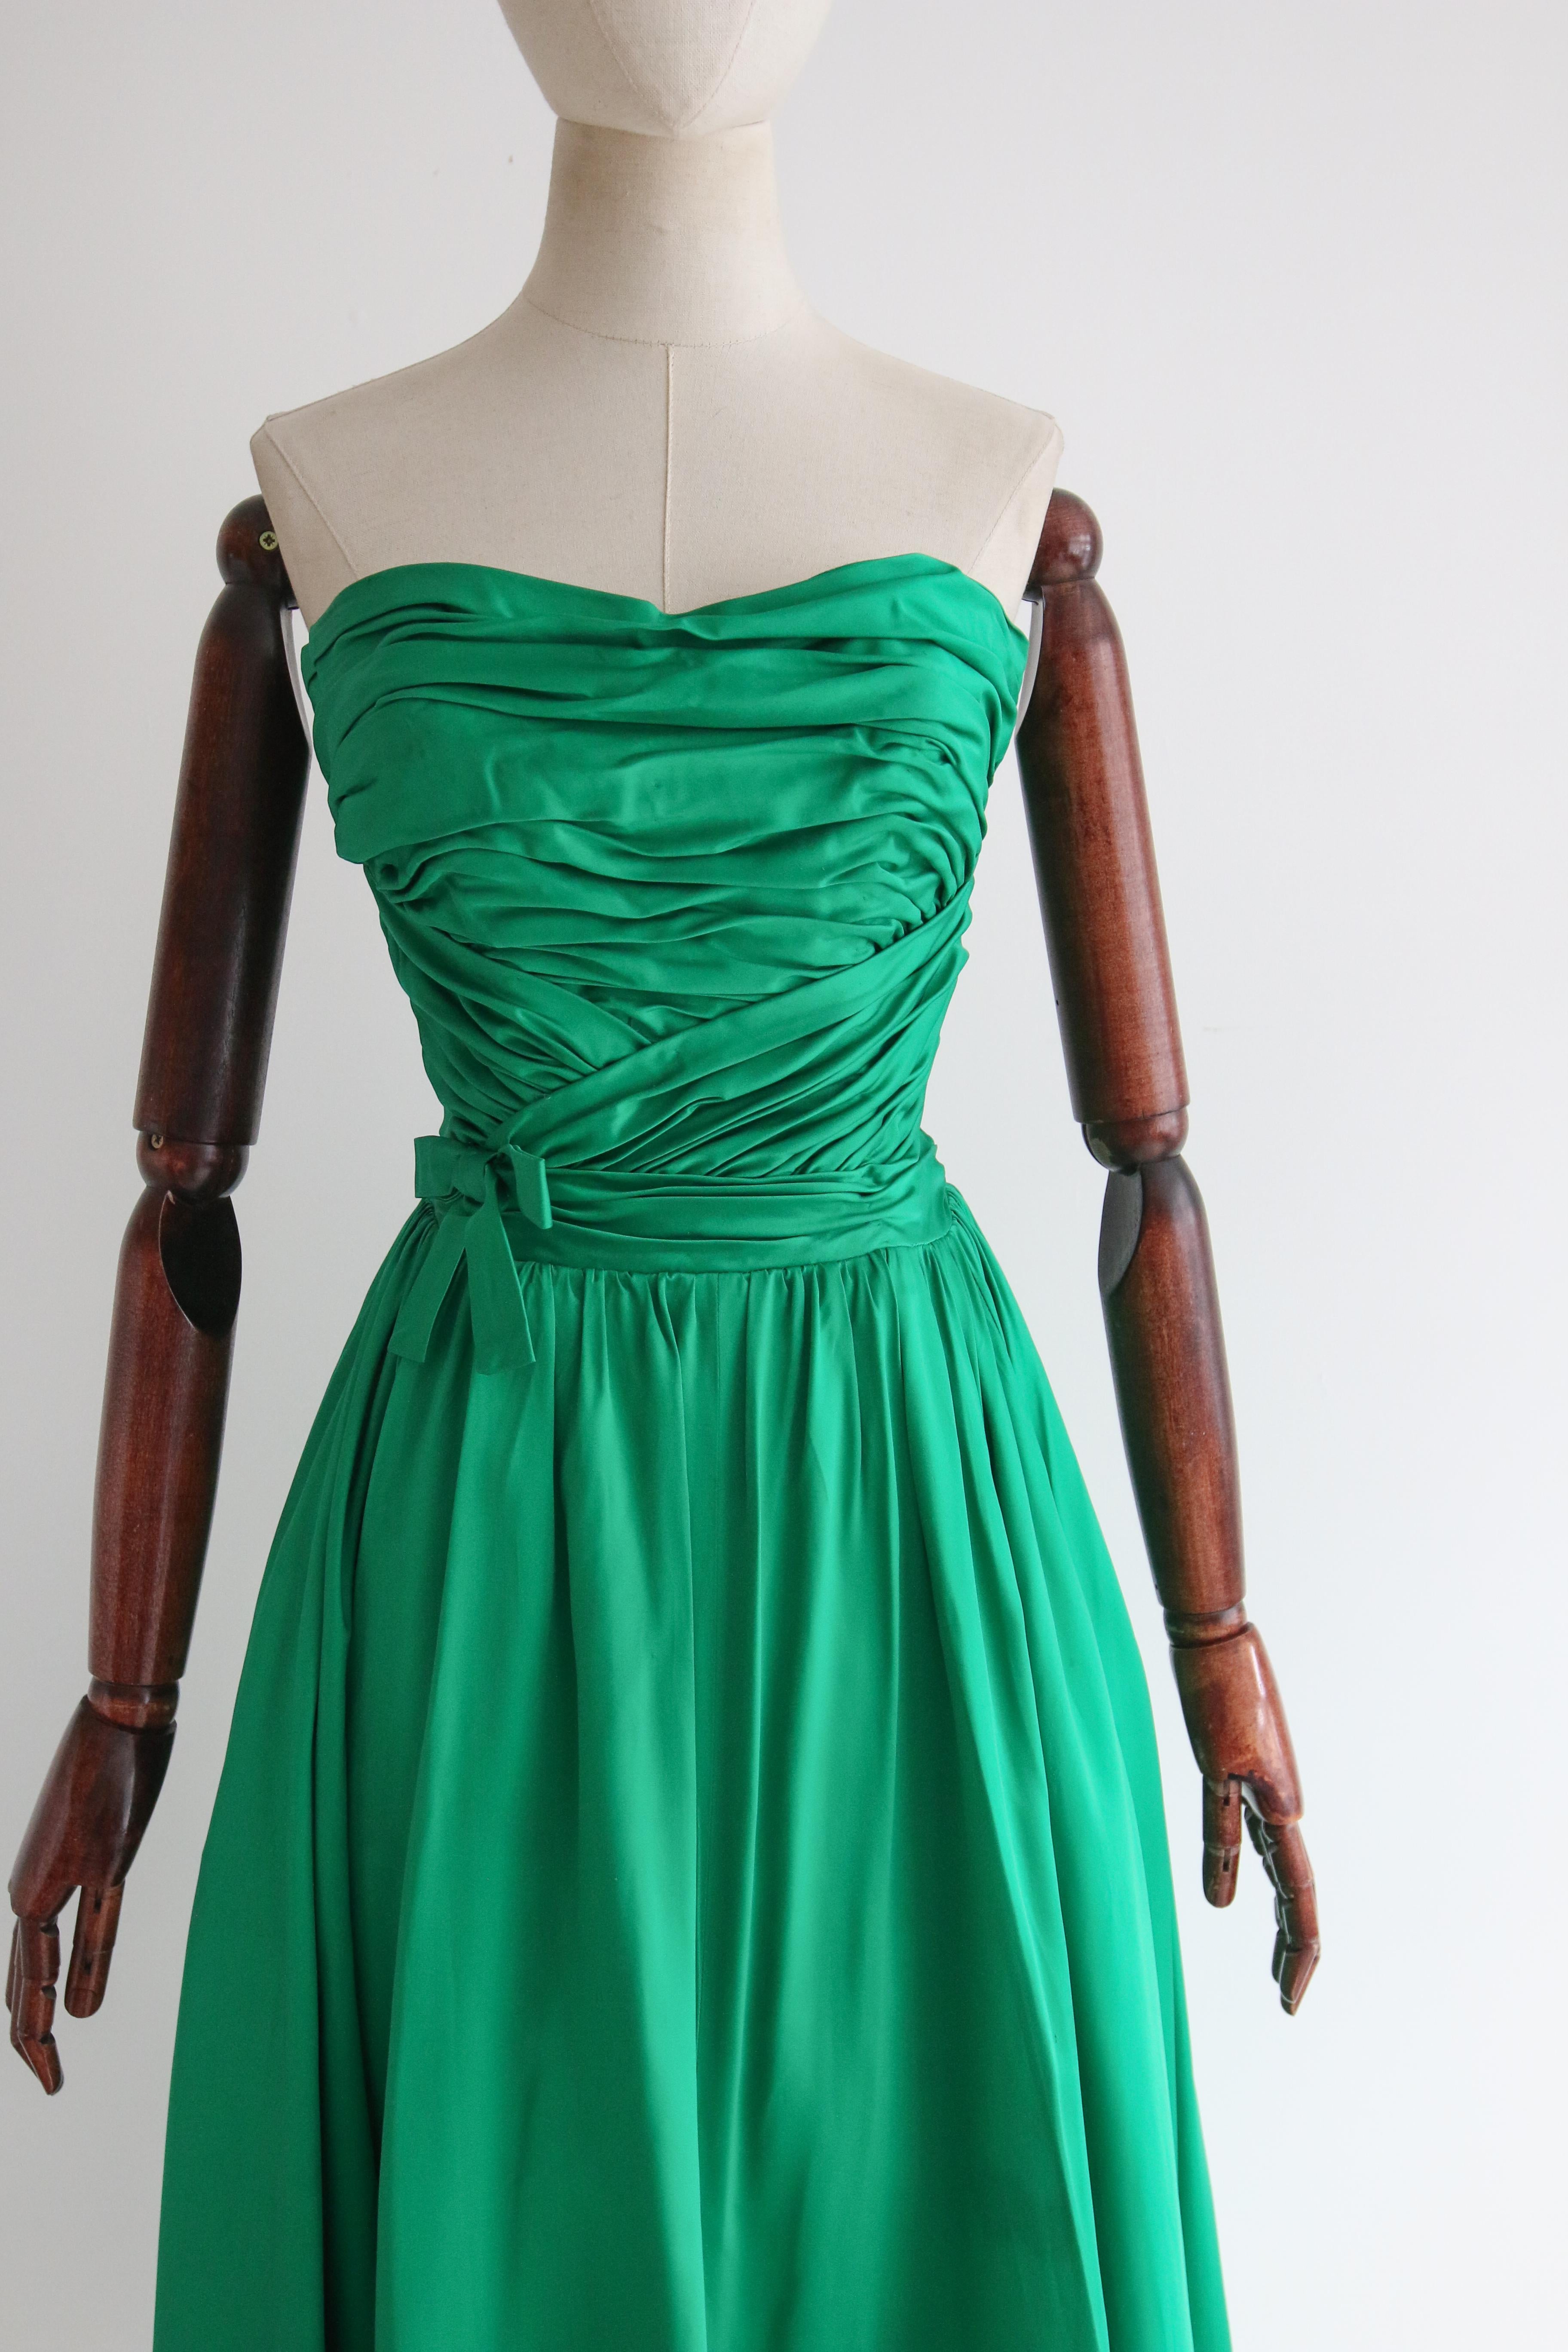 Women's Vintage 1950's Emerald Green Satin Pleated Strapless Dress UK 6 US 2 Susan Small For Sale